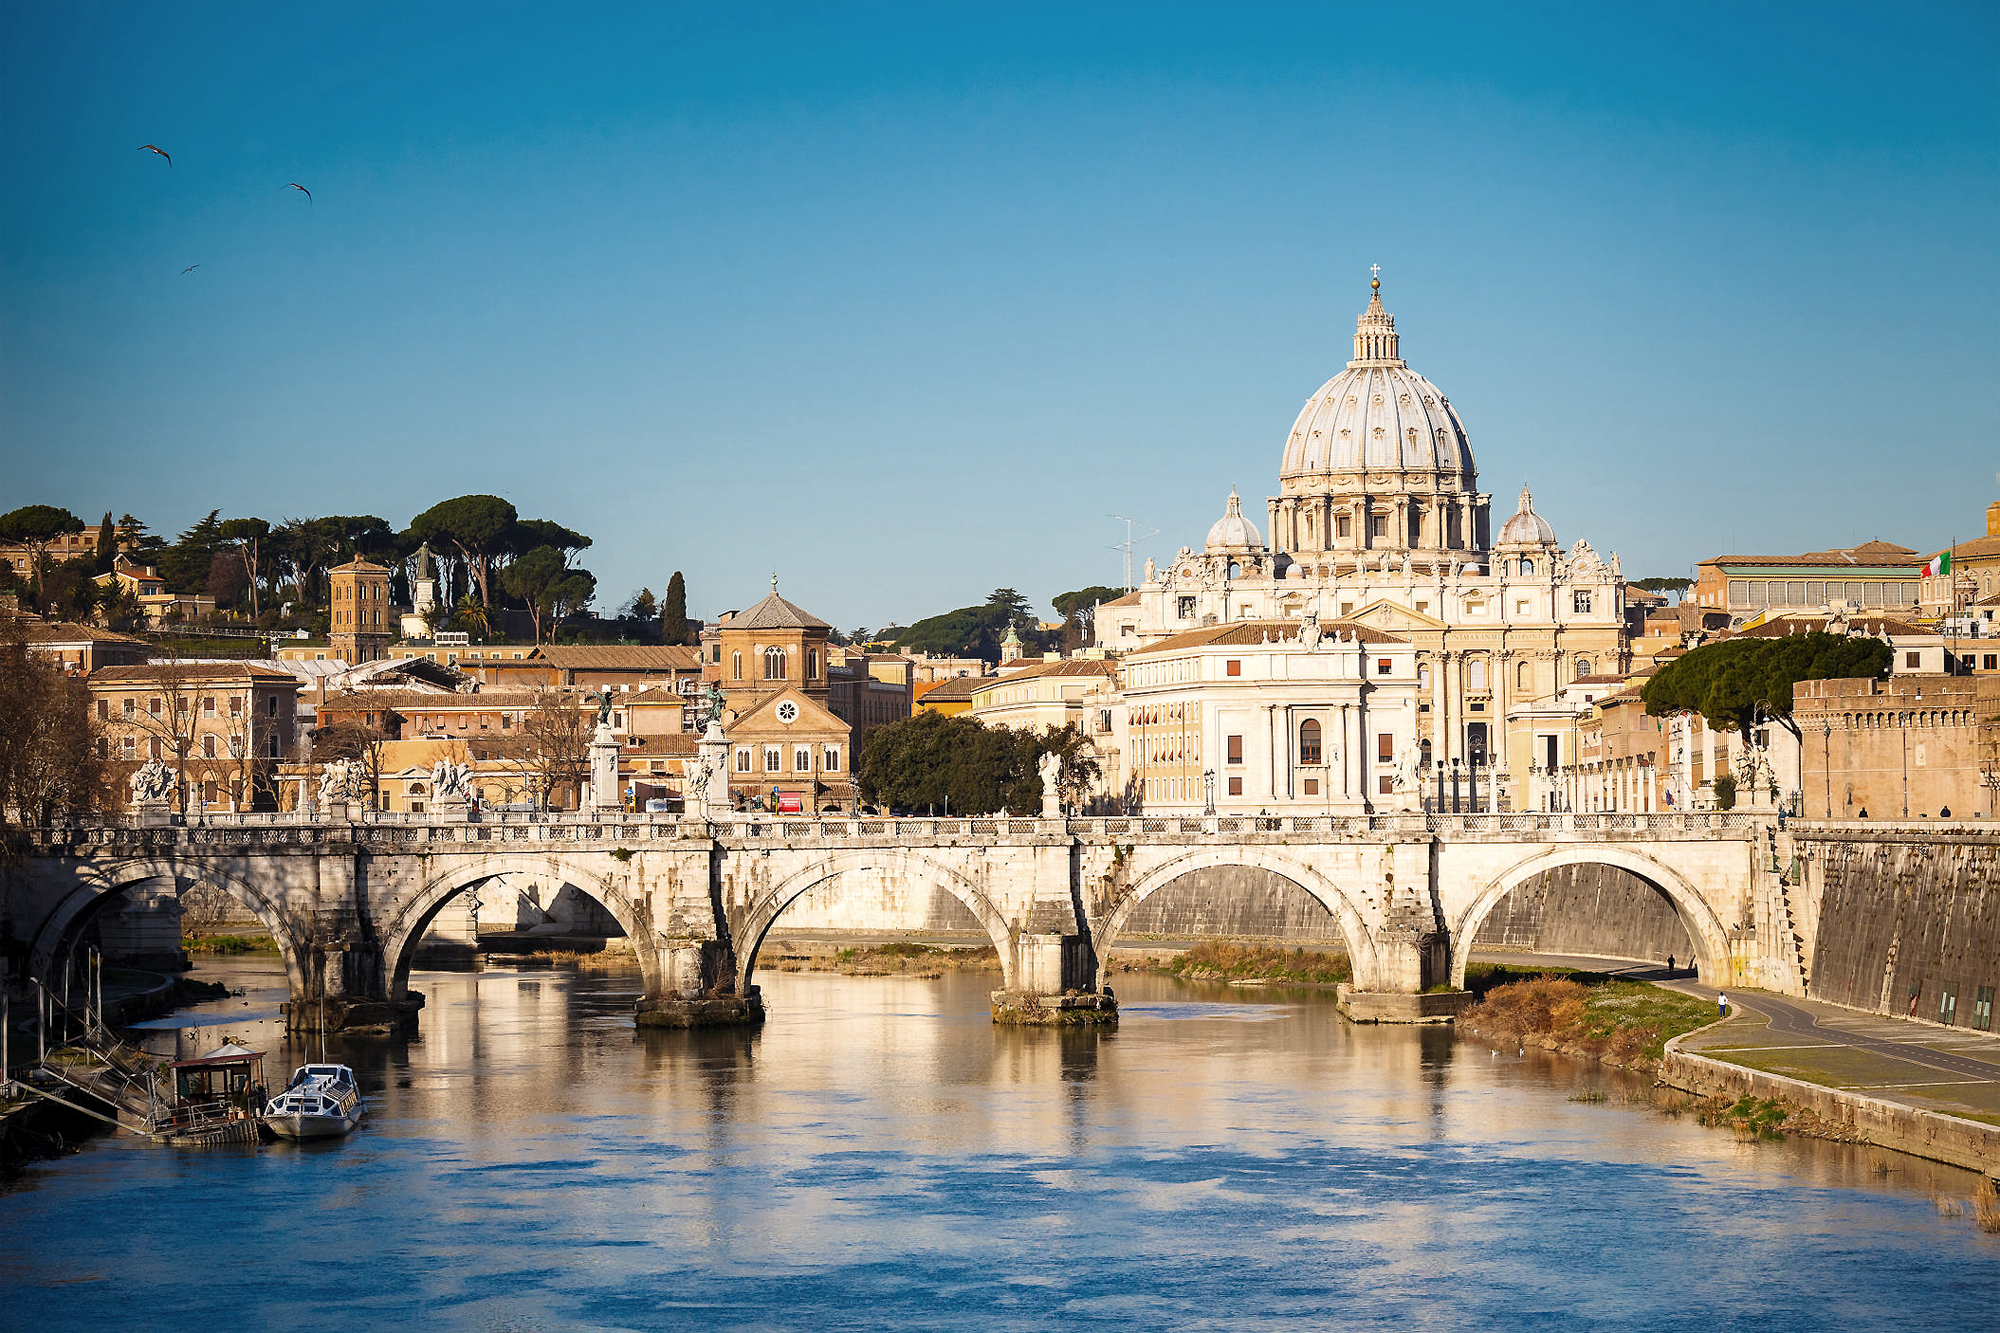 Vatican, Bridge, River adapted from state.gov image